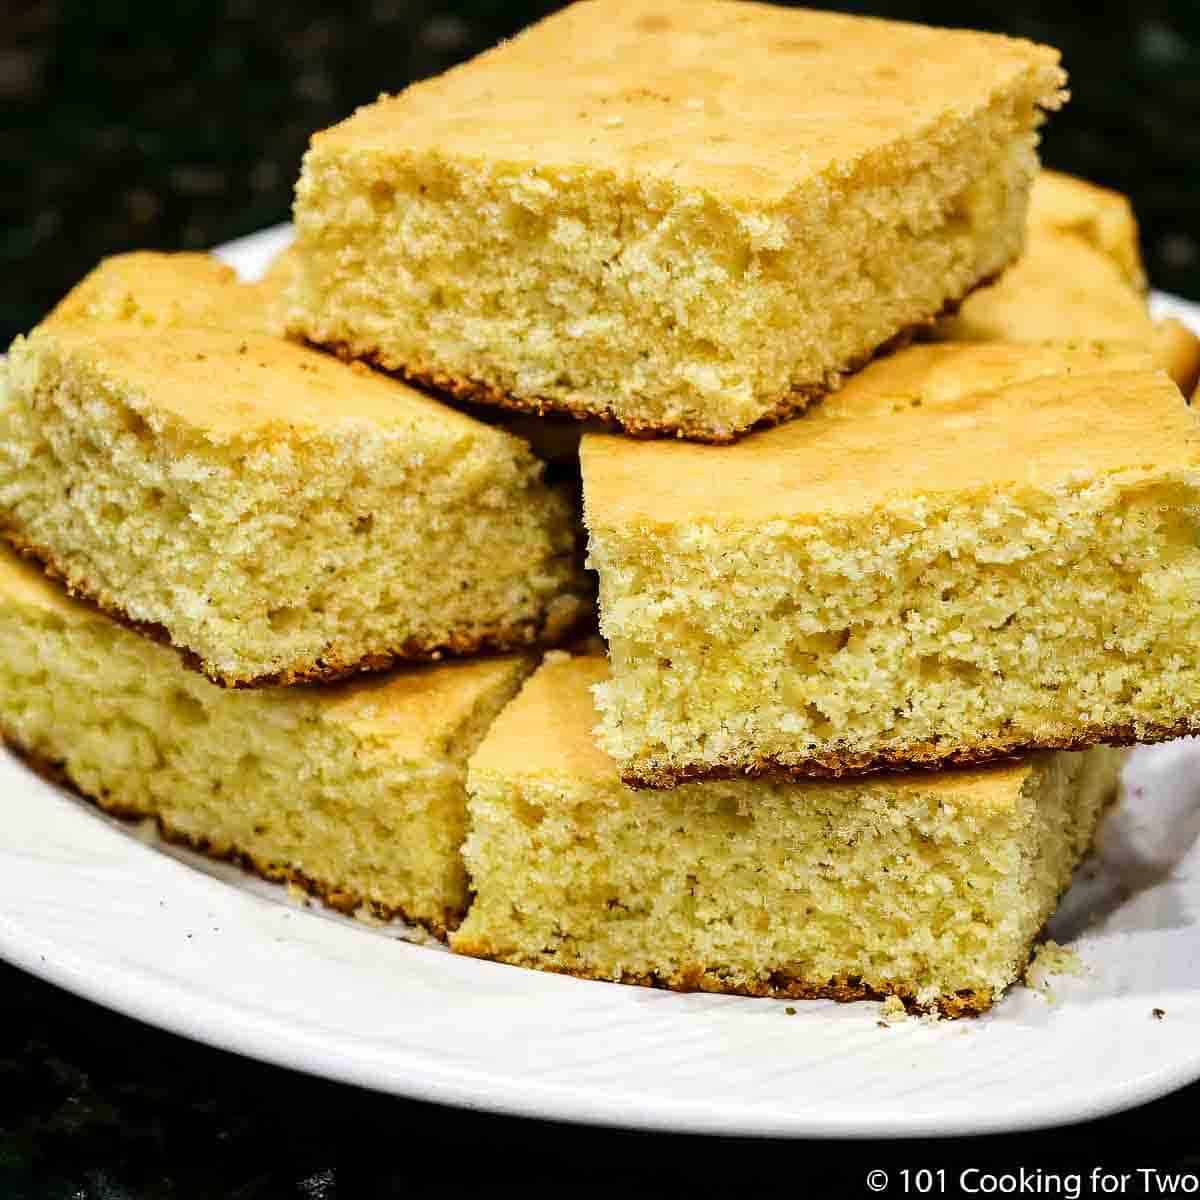 Pile of cornbread slices on a white plate.